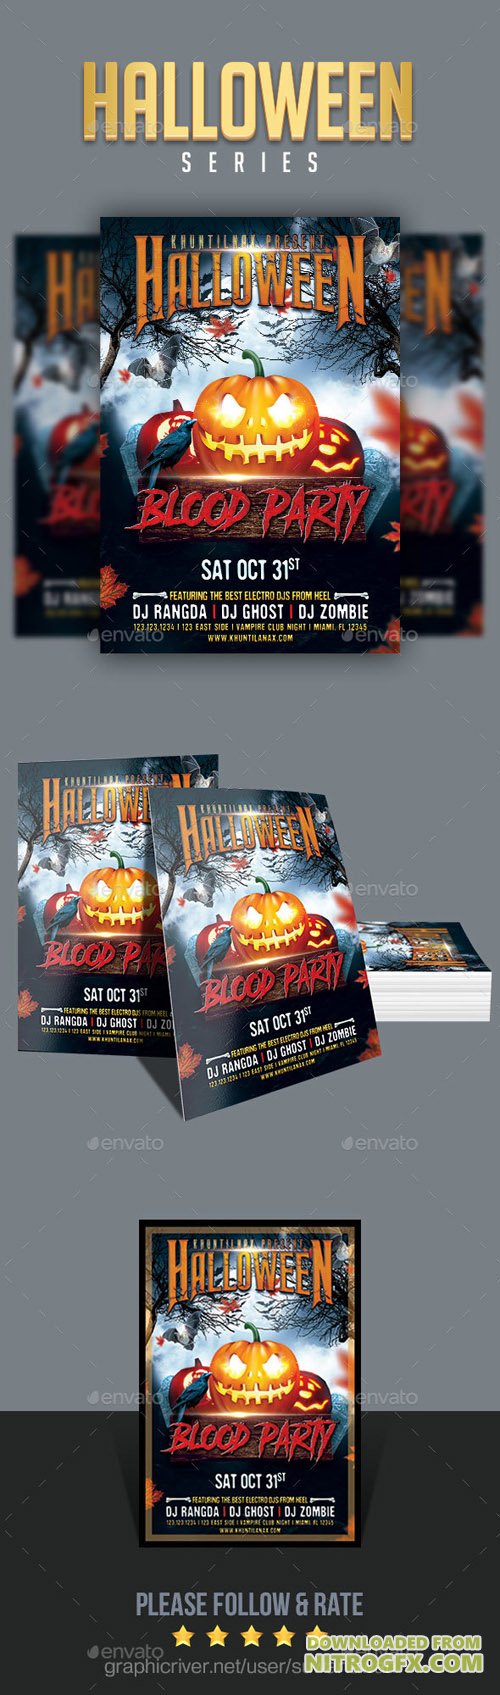 Halloween Blood Party Flyer 20693638